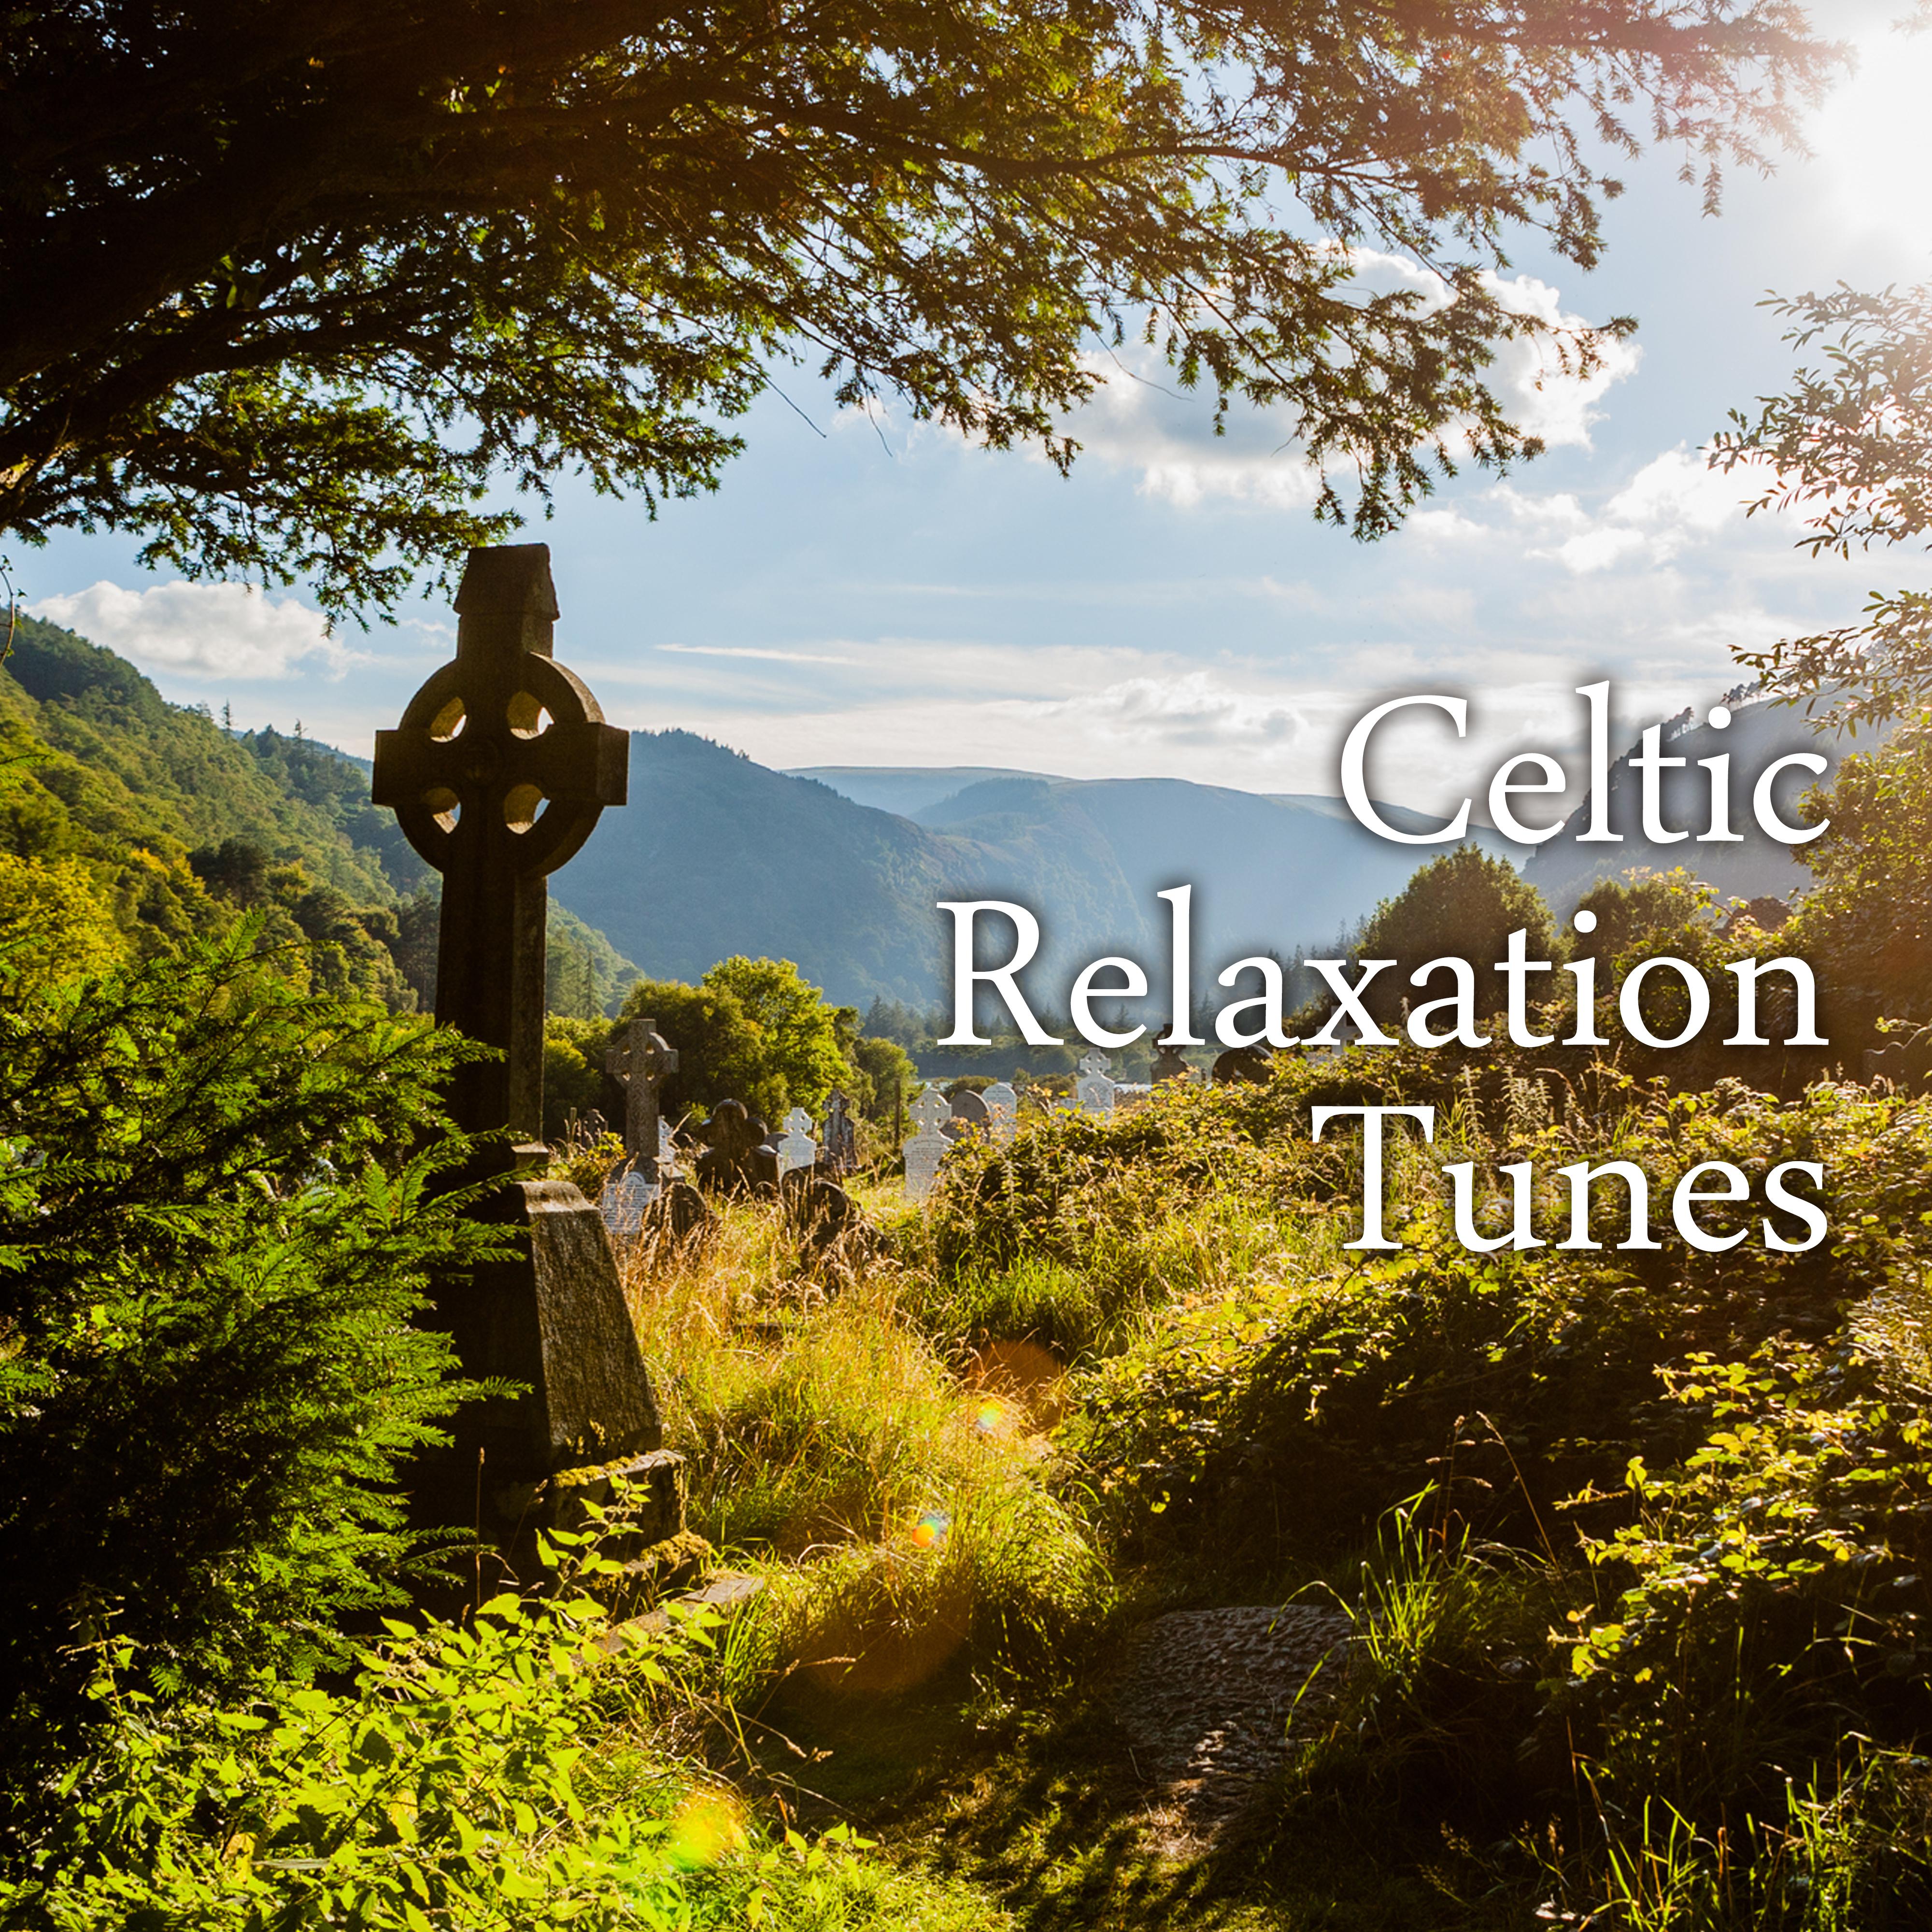 Celtic Relaxation Tunes - Beautiful Ambient Music for the Spa, Sauna, Massage, Hot Baths, Rest and Relaxation, as well as for Yoga and Meditation